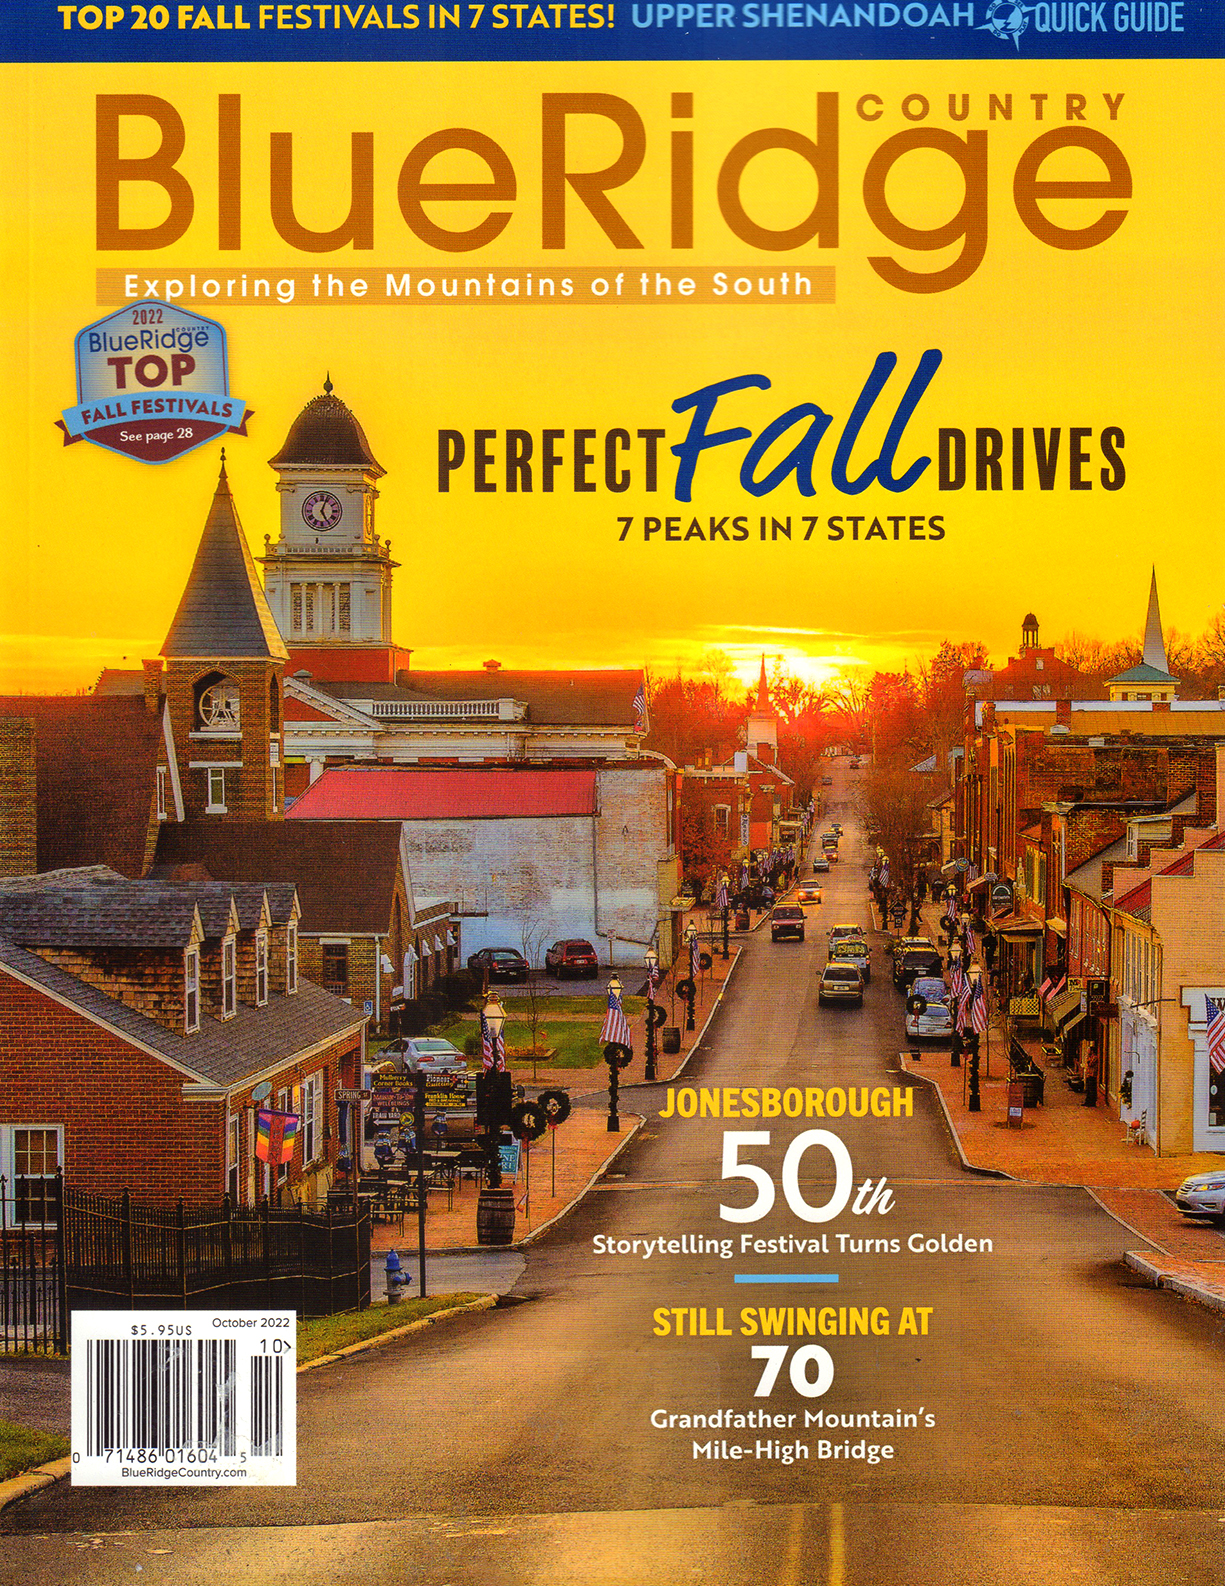 Subscribe to Blue Ridge Country Magazine